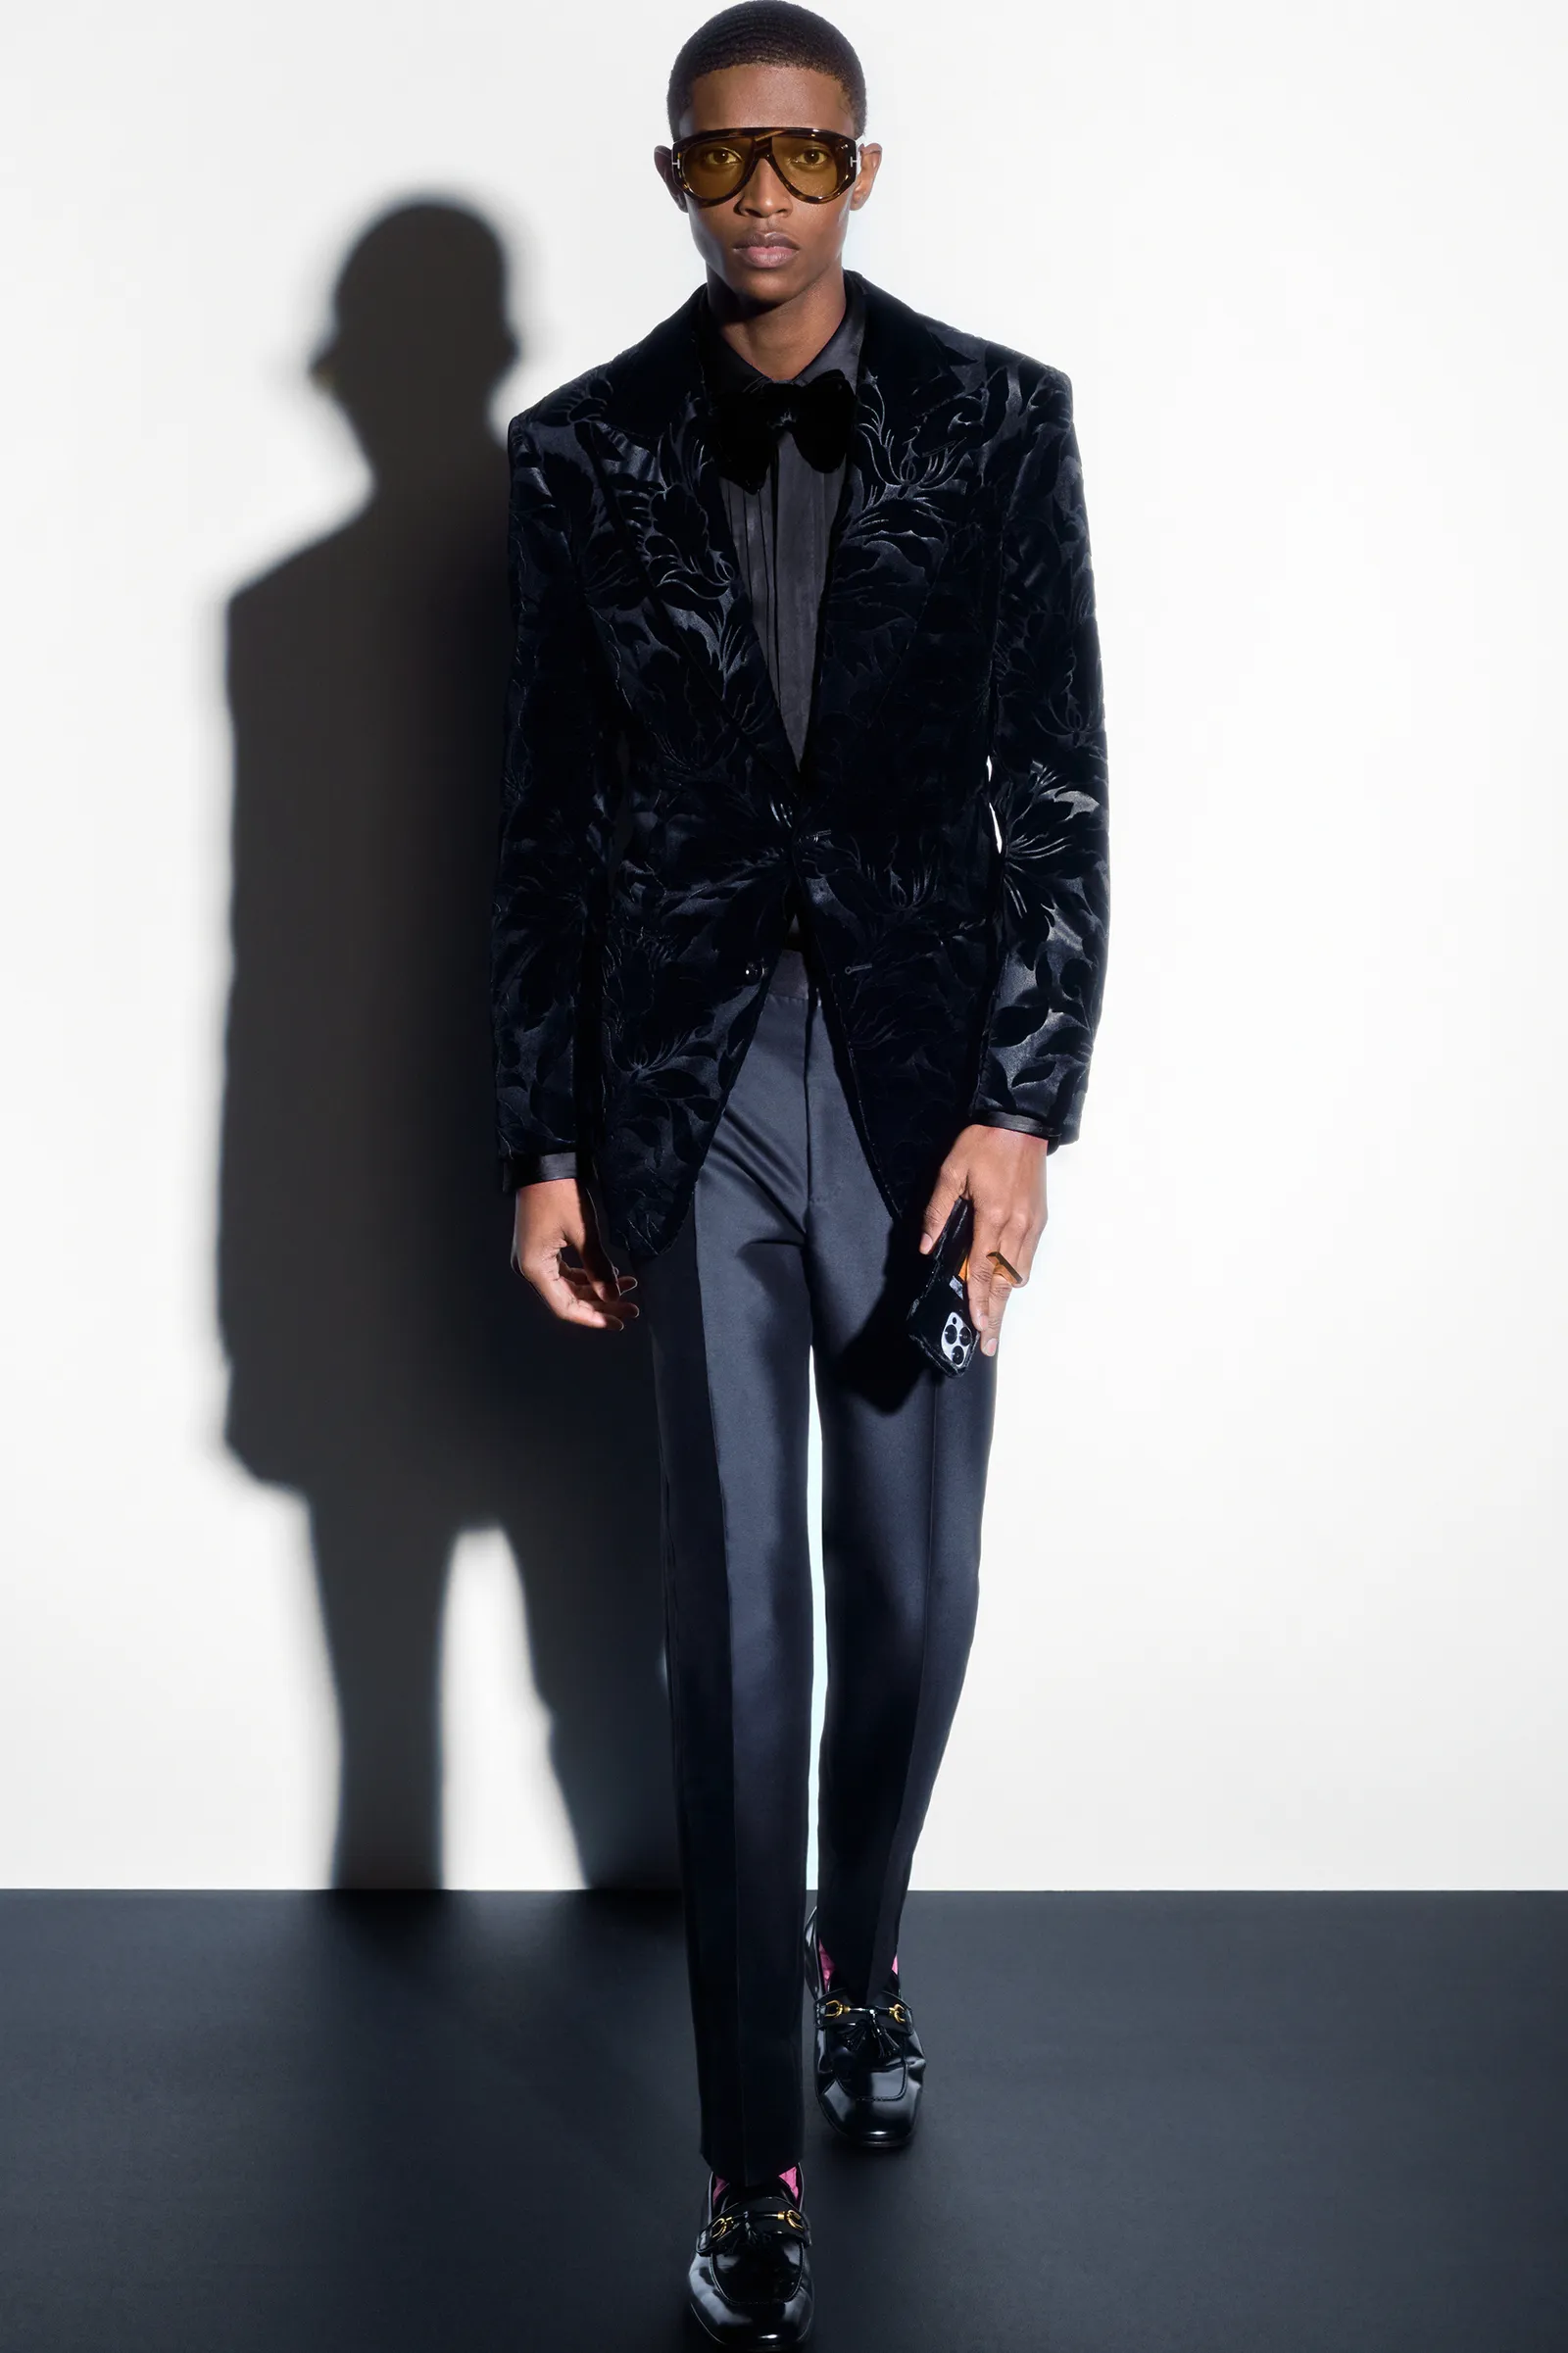 00044-tom-ford-fall-22-mens-nyc-credit-brand.png